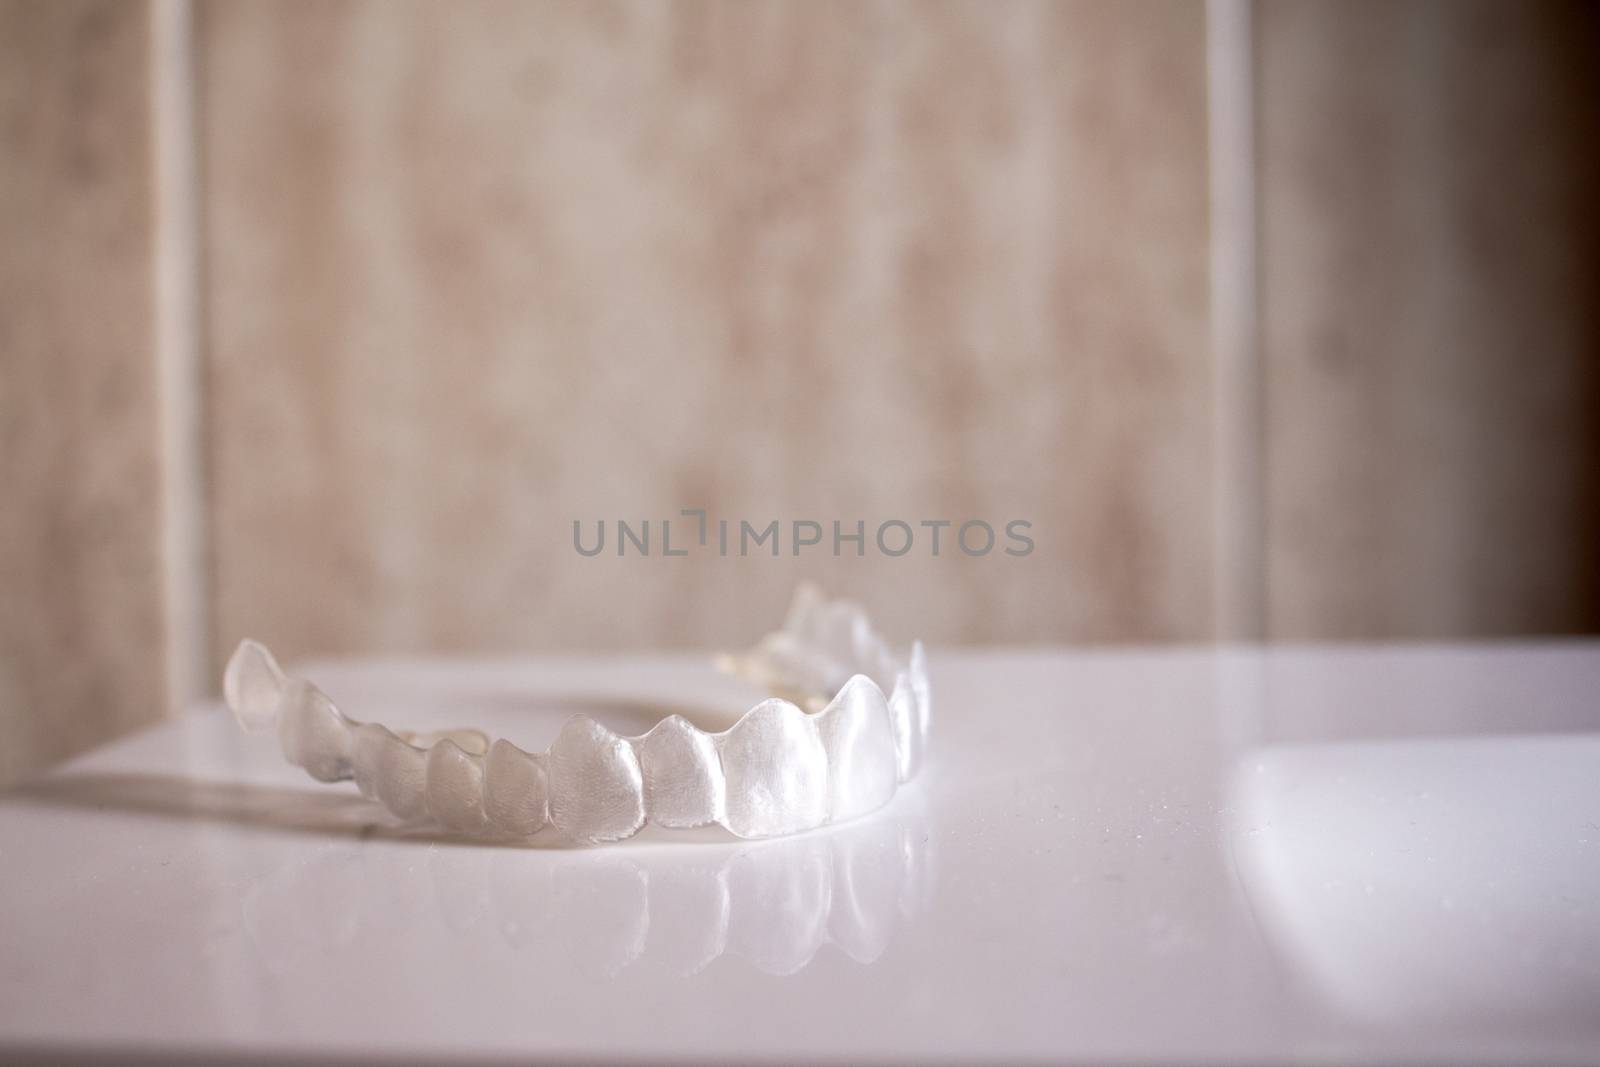 Top of invisible orthodontics by GemaIbarra